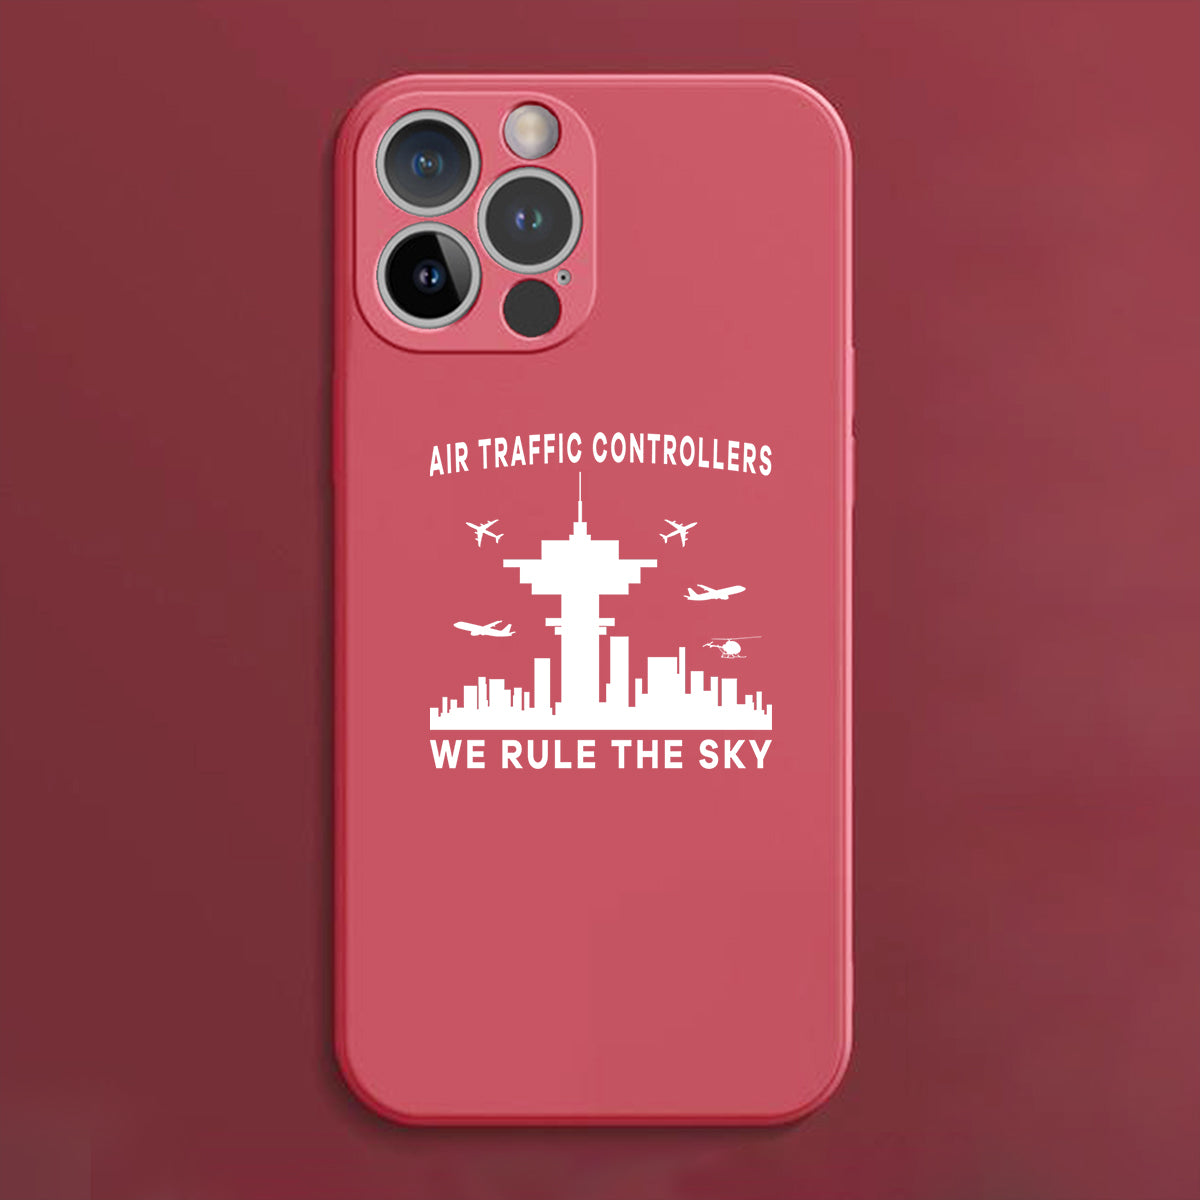 Air Traffic Controllers - We Rule The Sky Designed Soft Silicone iPhone Cases